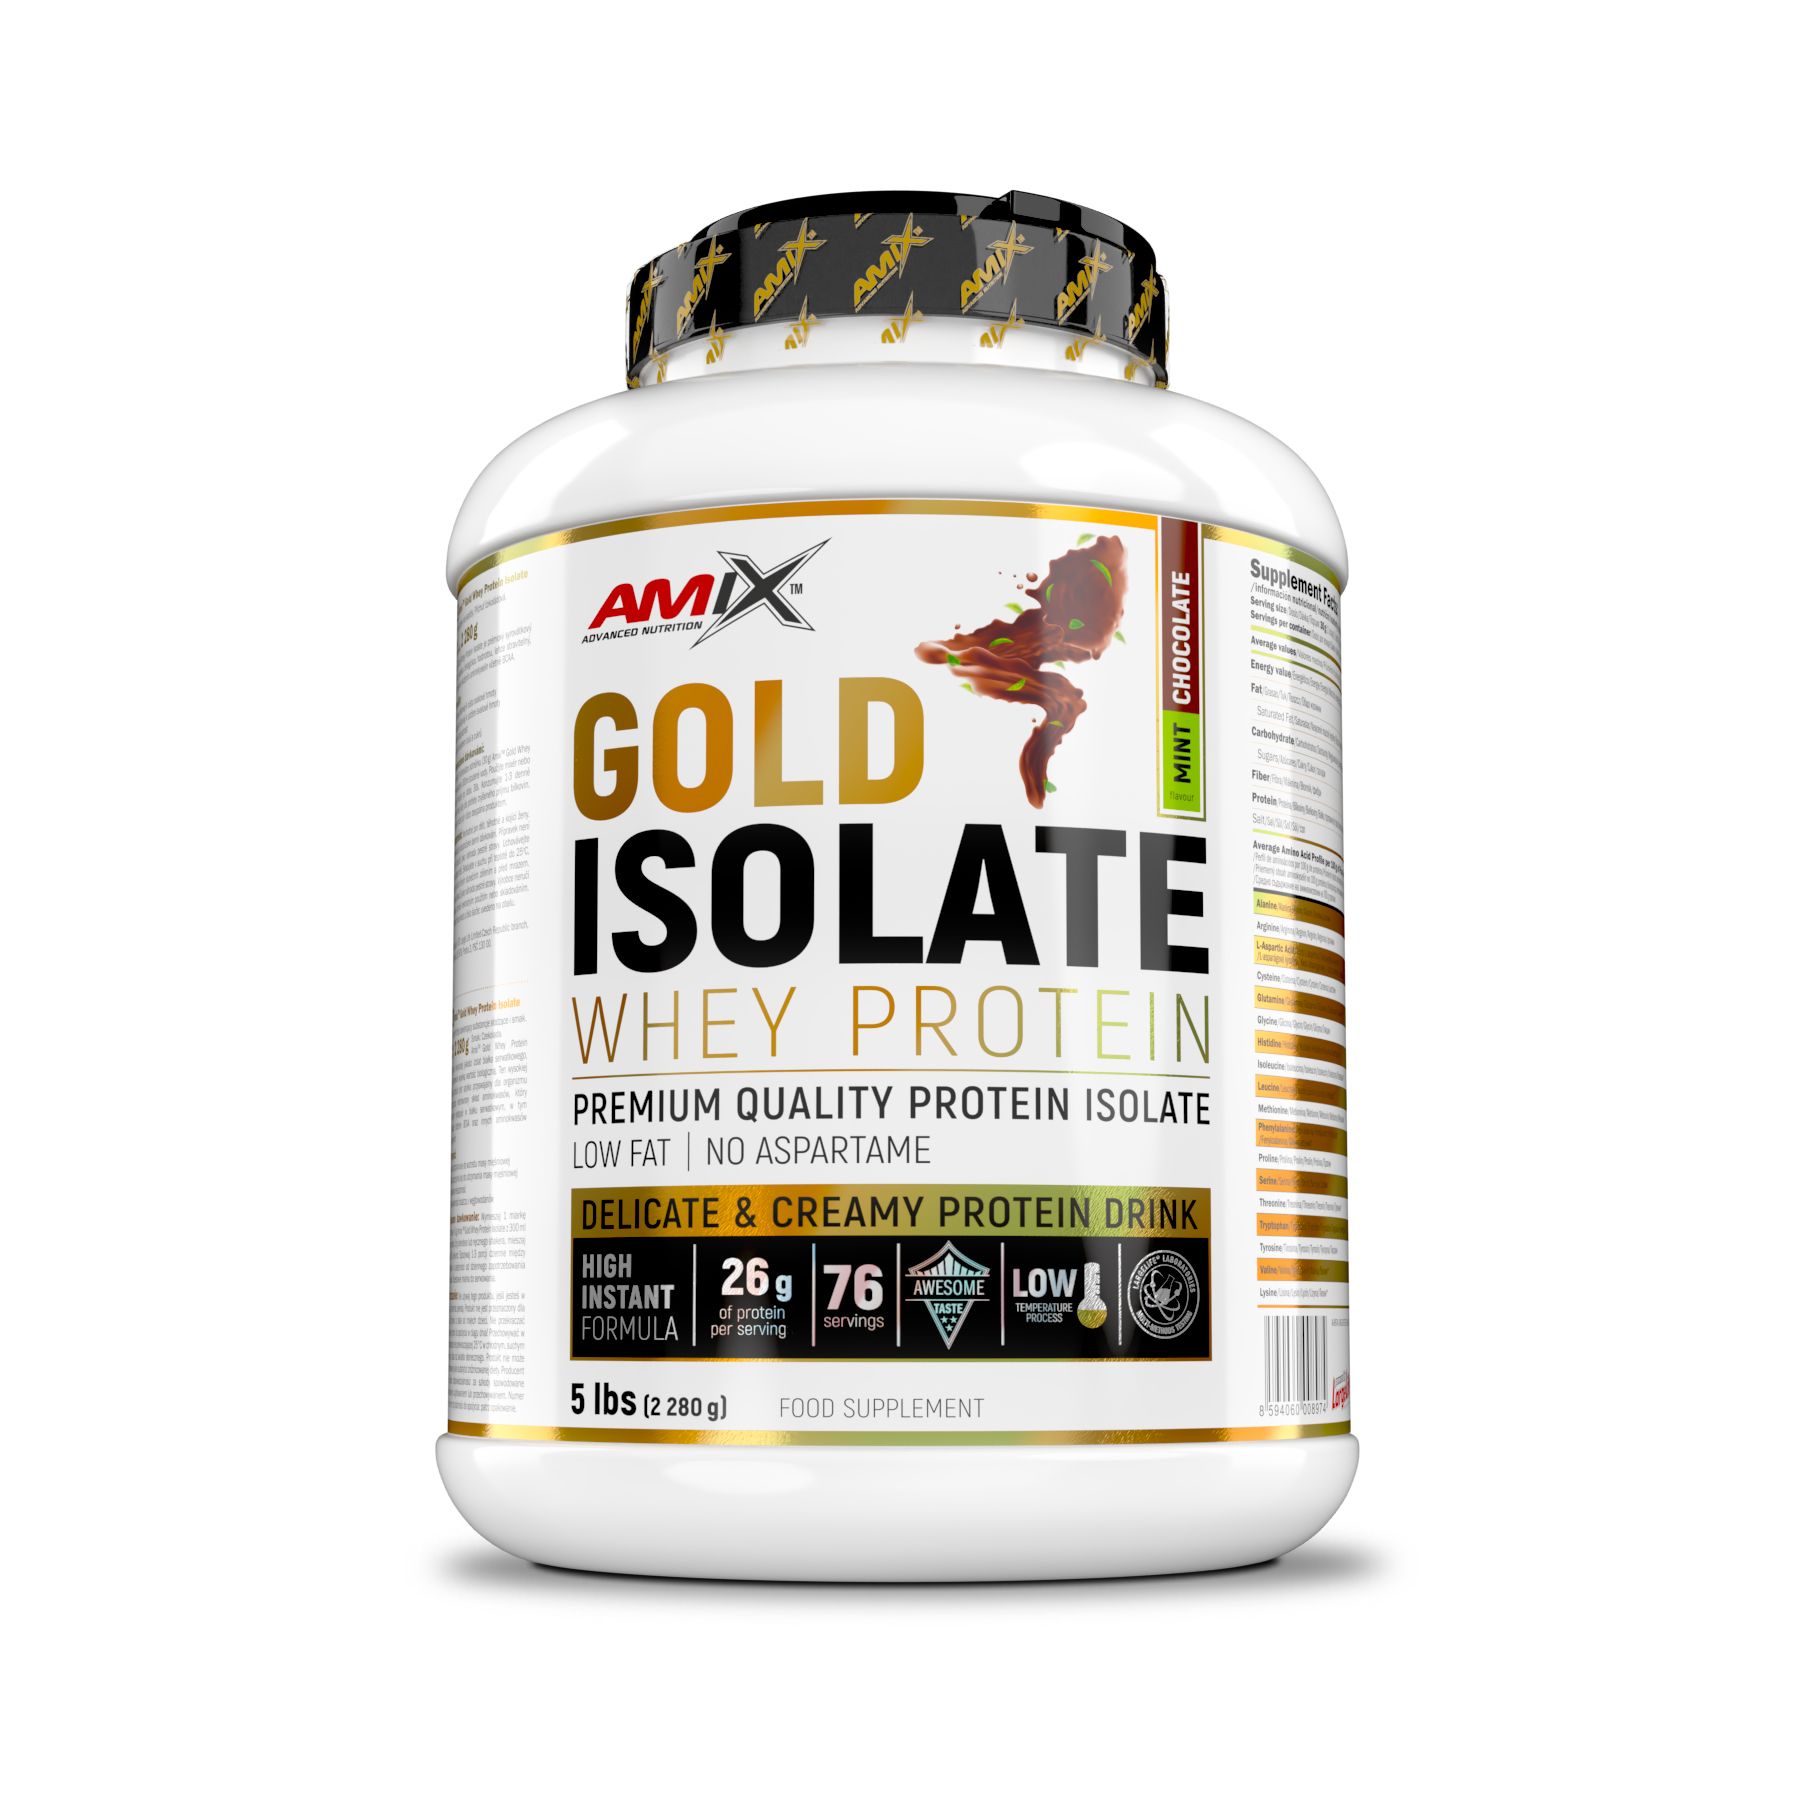 Amix Gold Whey Protein Isolate - 2280g - Mint Chocolate